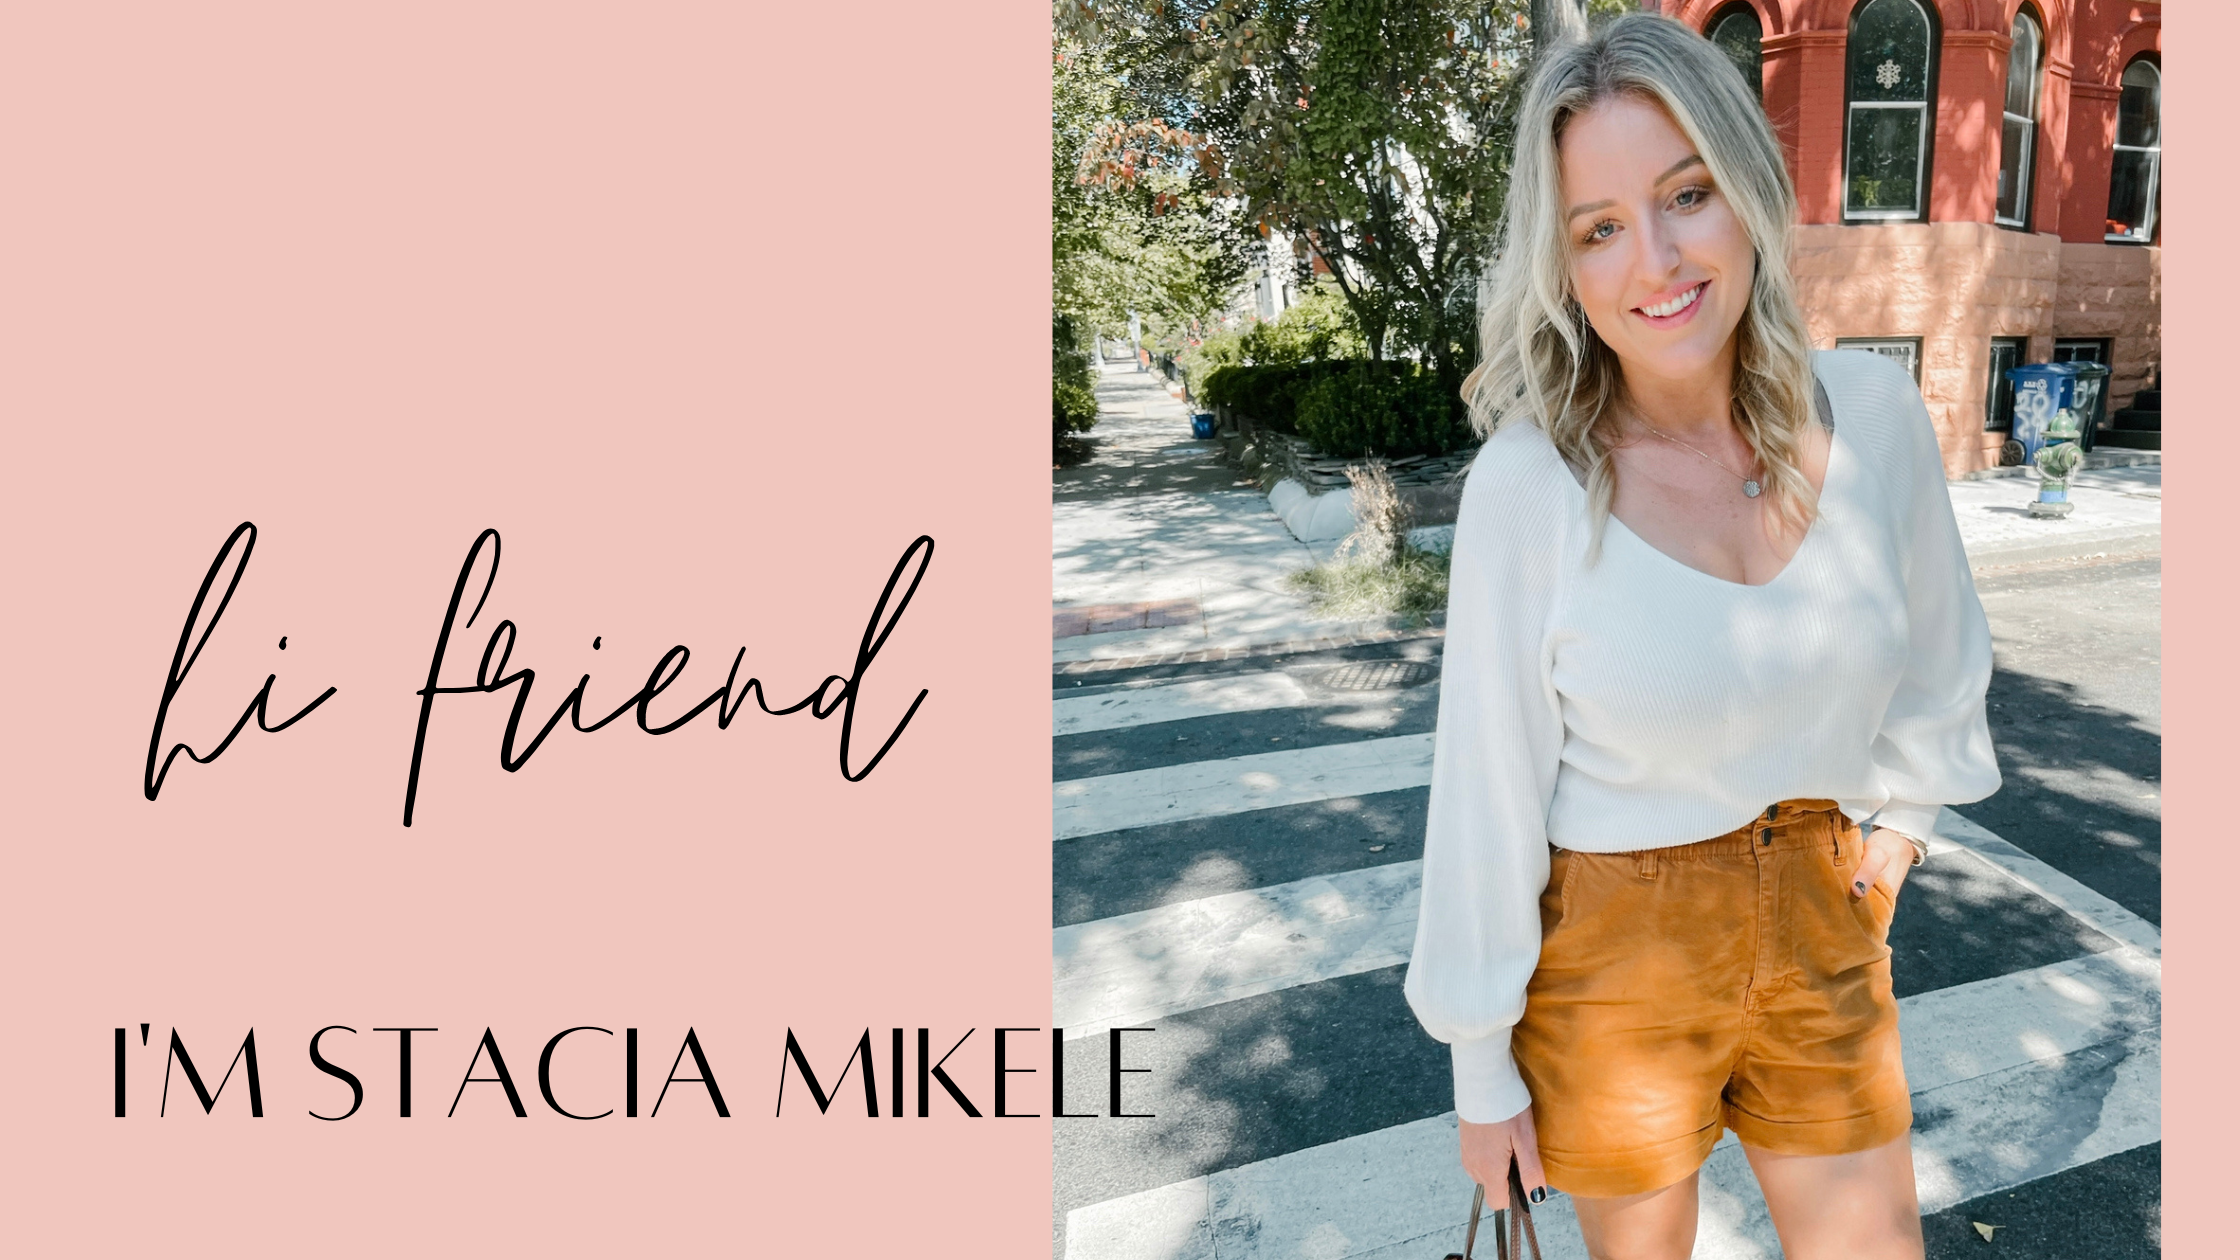 stacia mikele blog<br />
